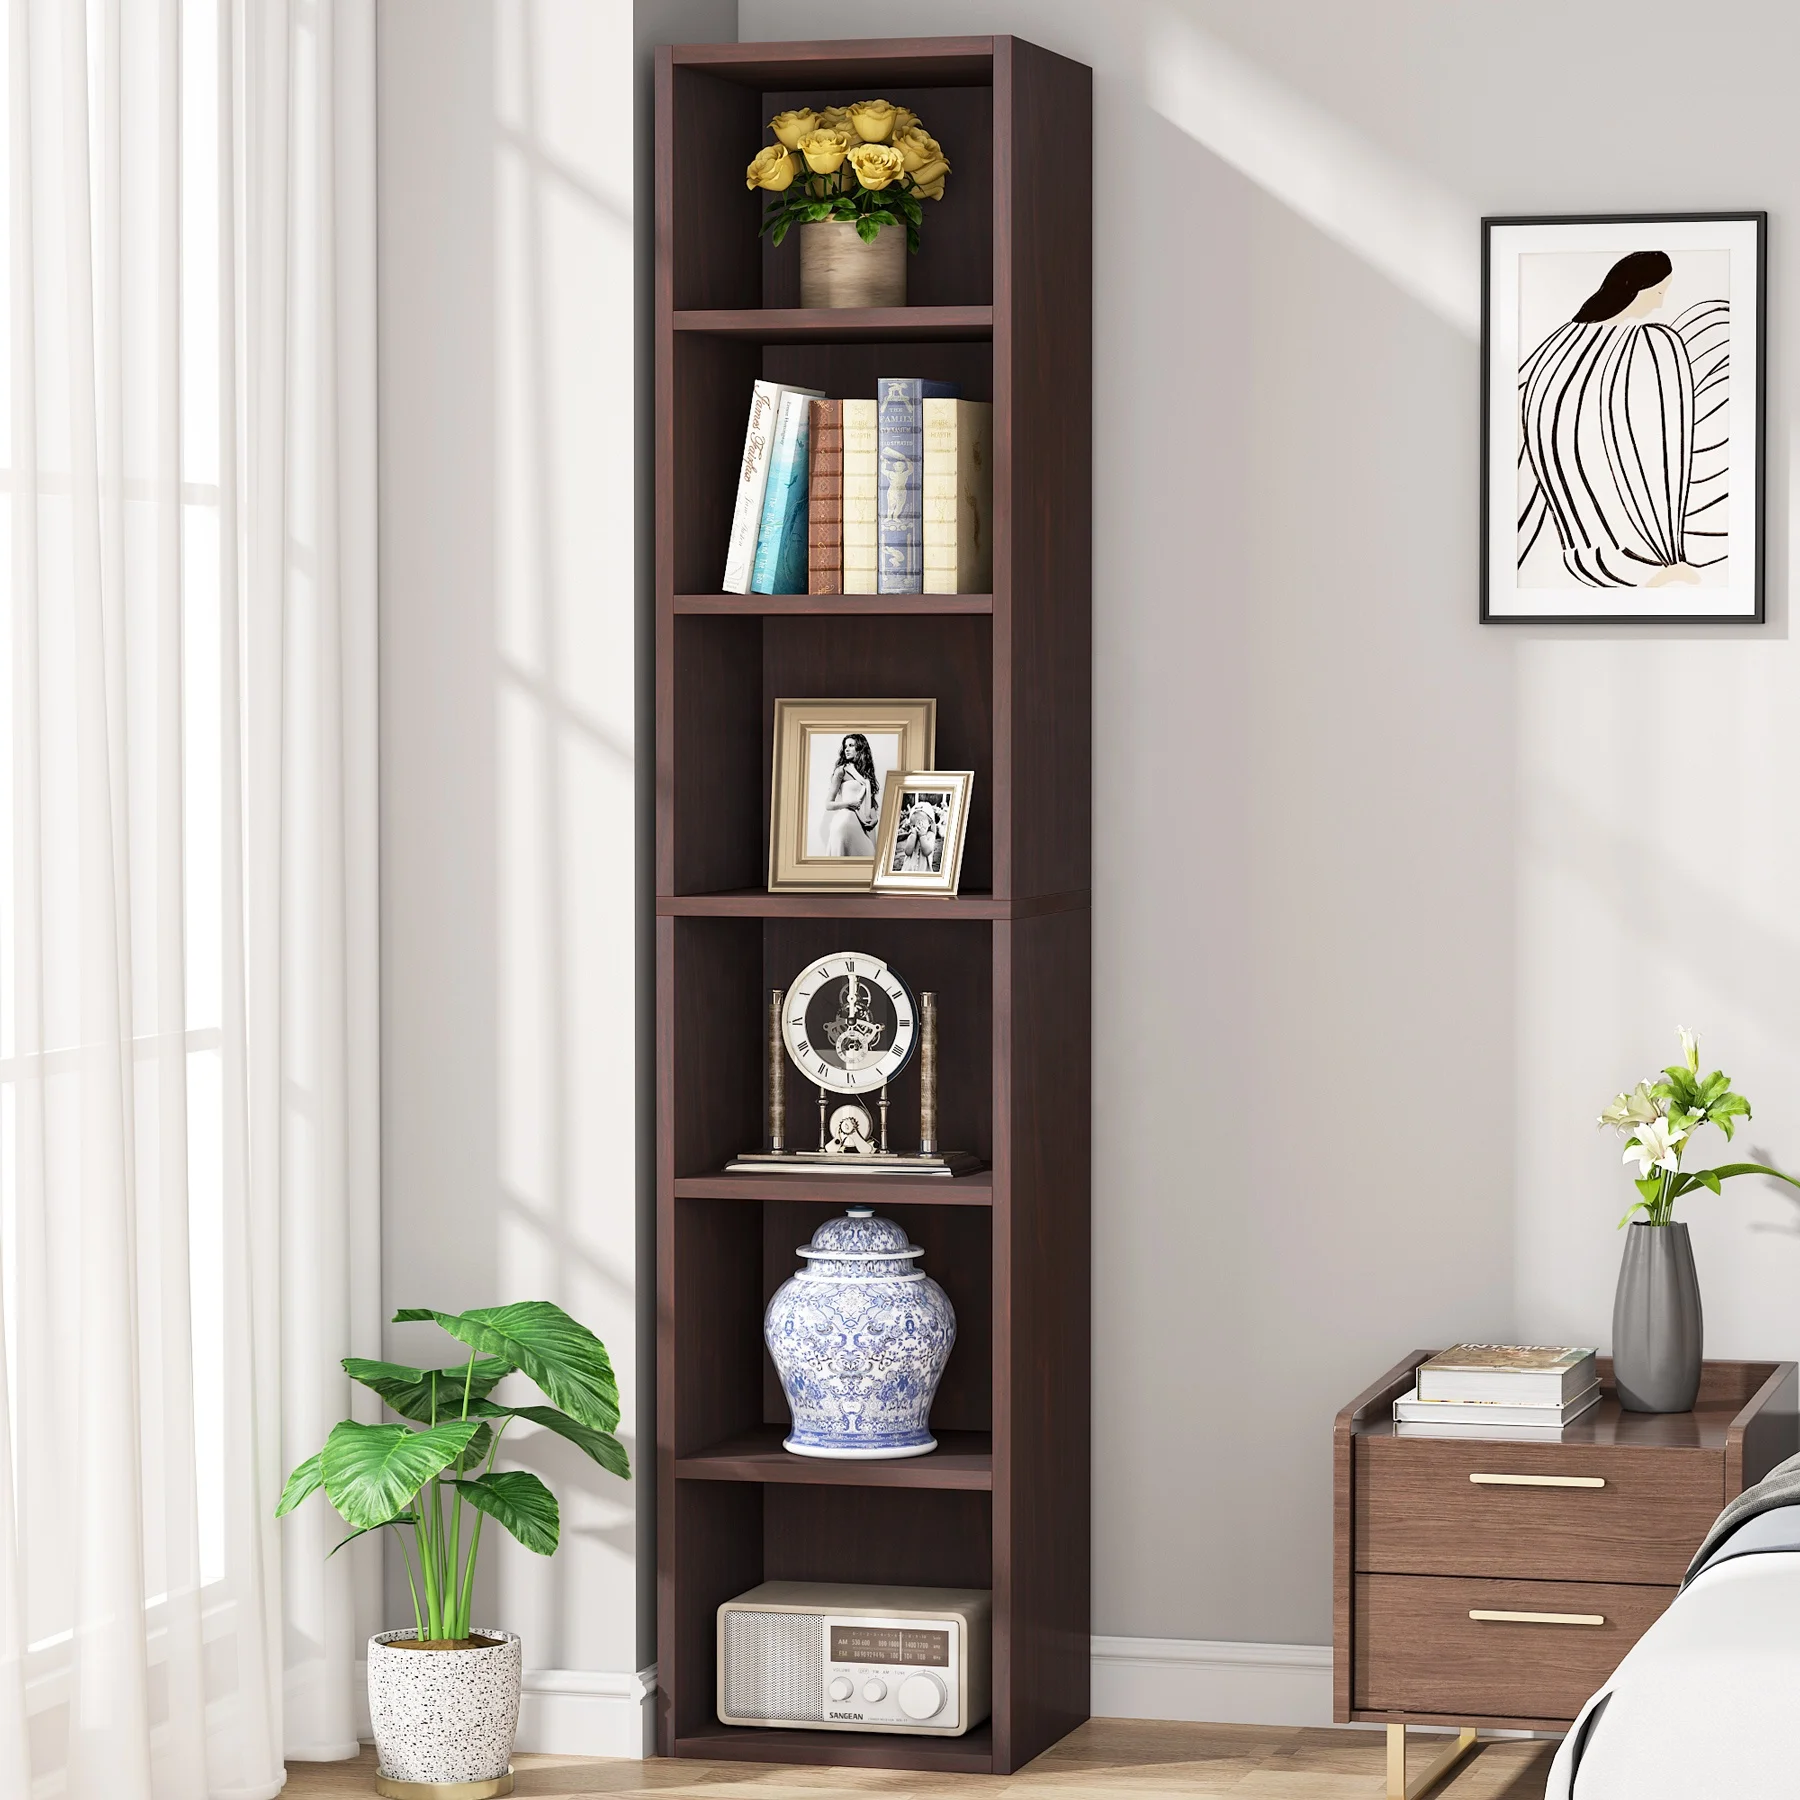 Tribesigns Multifunctional Home Decoration 70.9 Inch Tall 6 Tier Cube Display Shelves Narrow Bookcase for Home Office